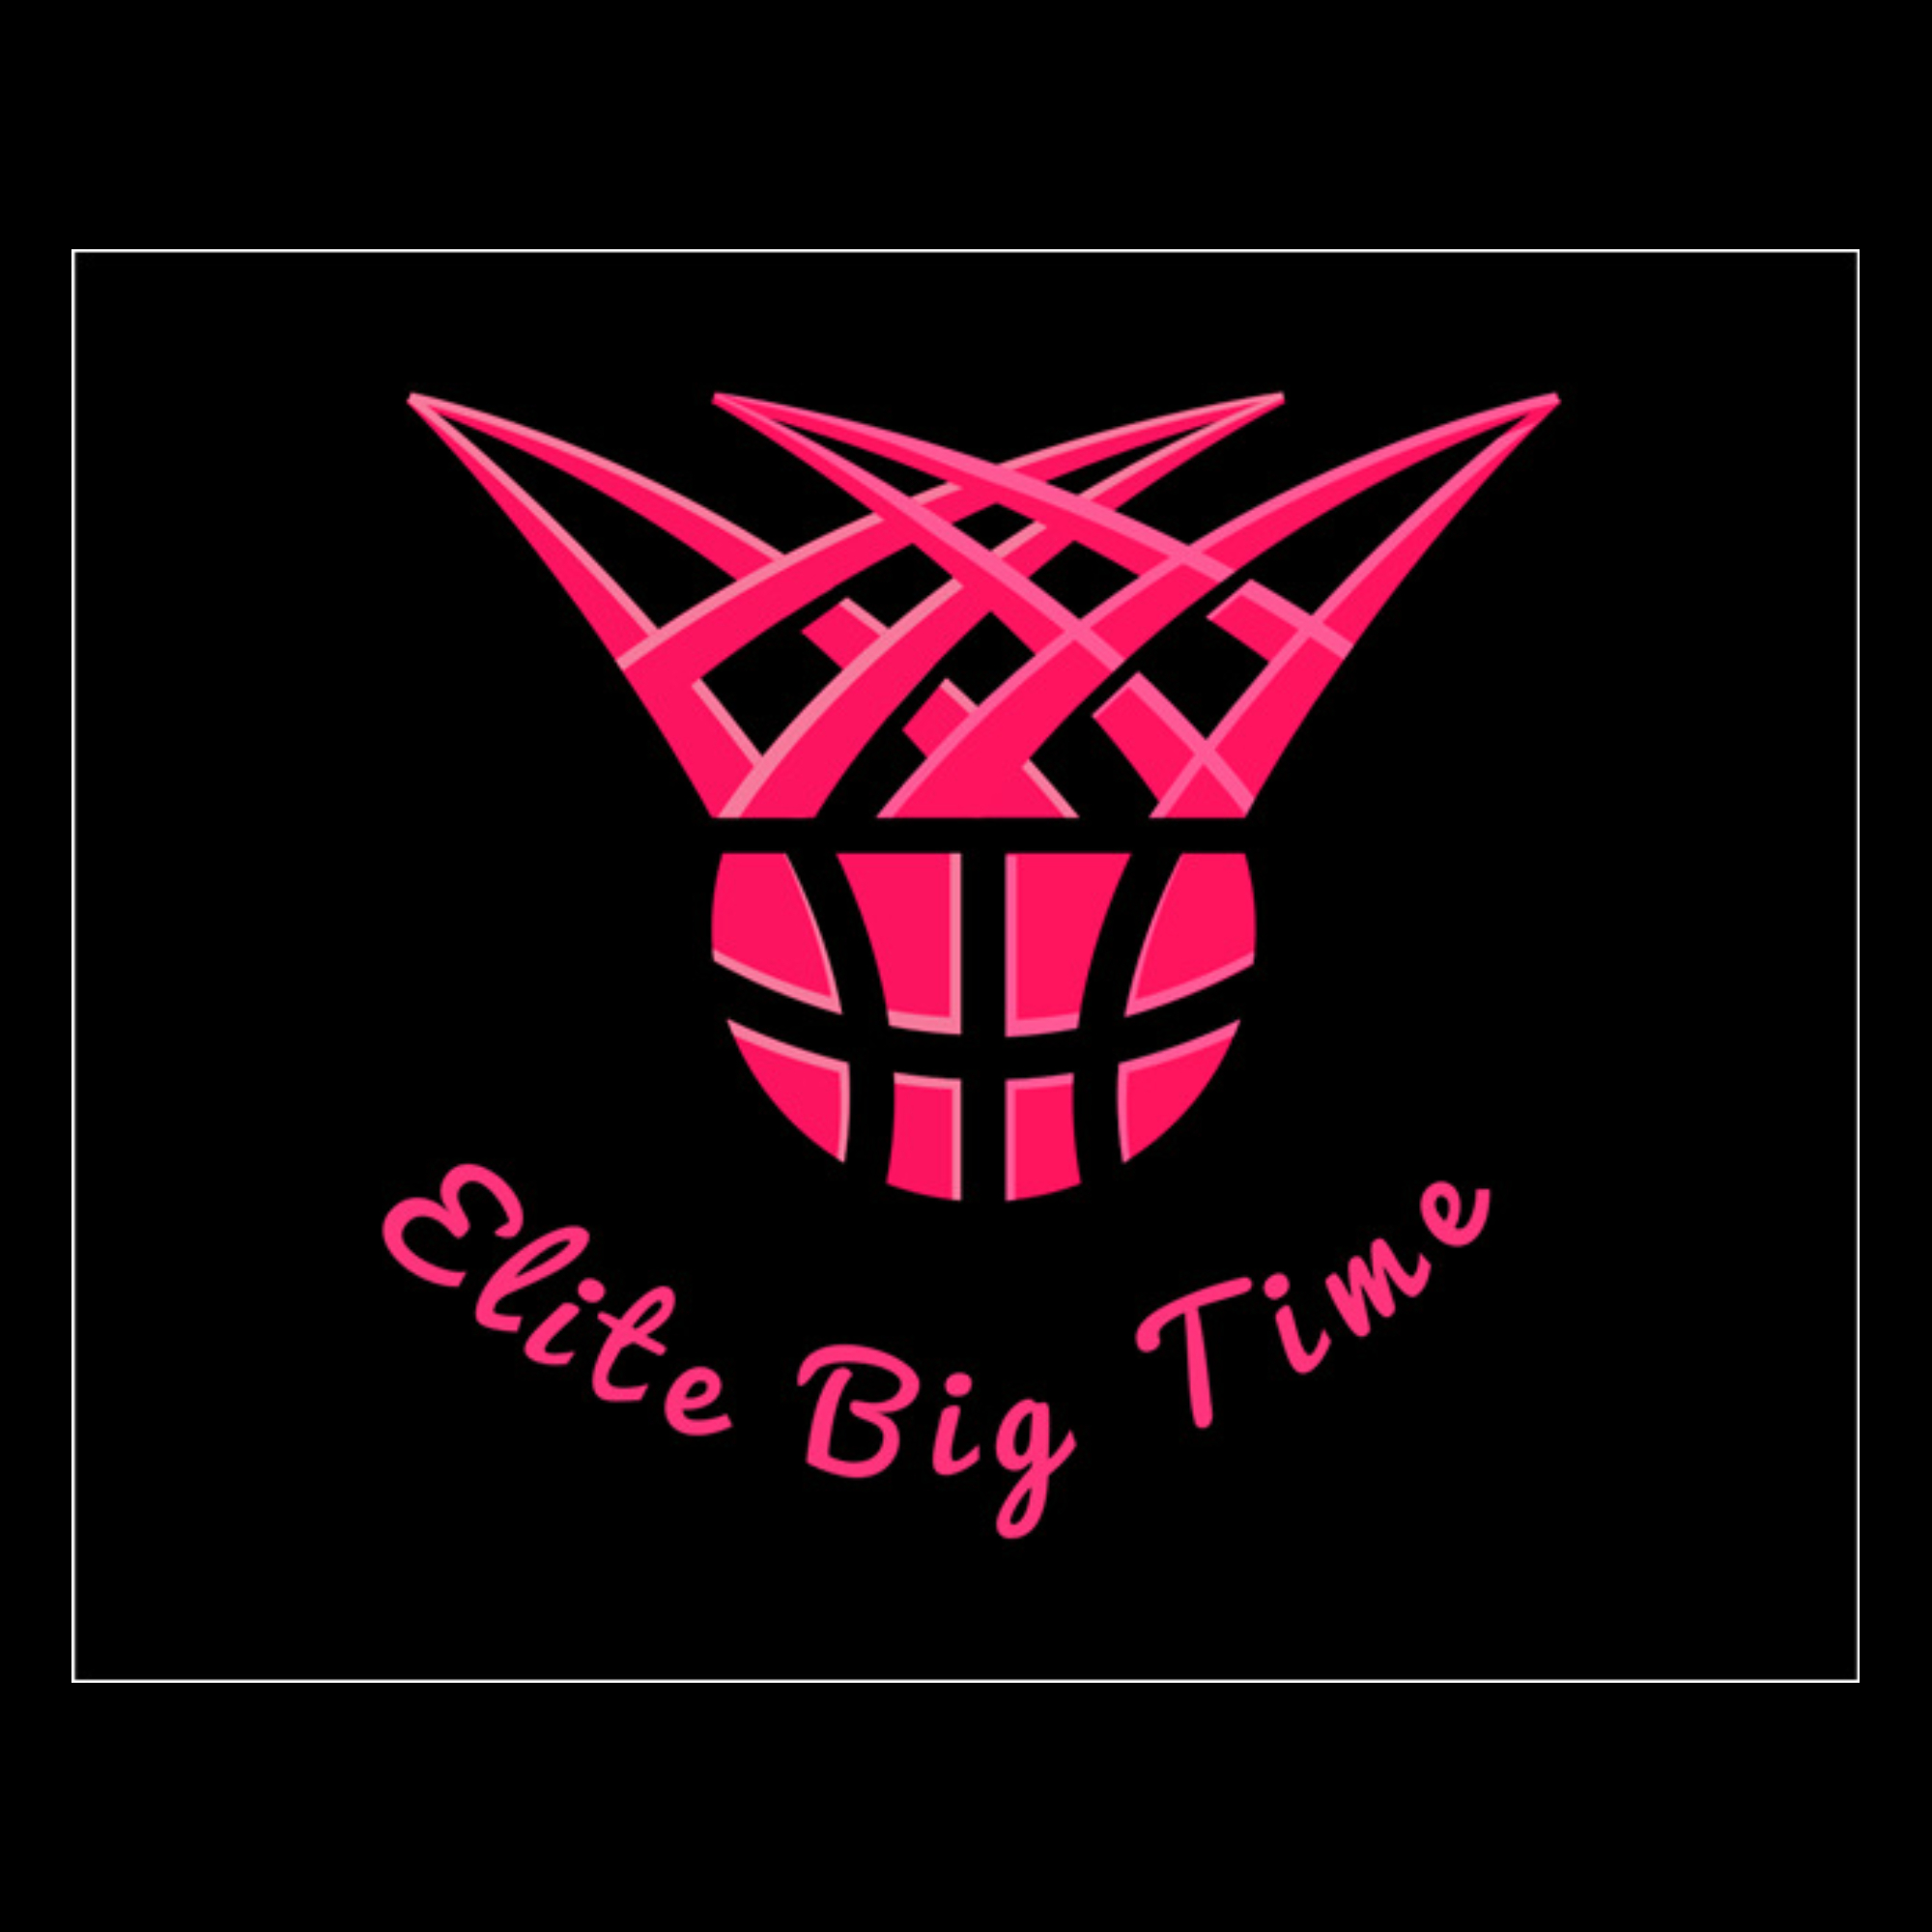 The official logo of Elite Big Time